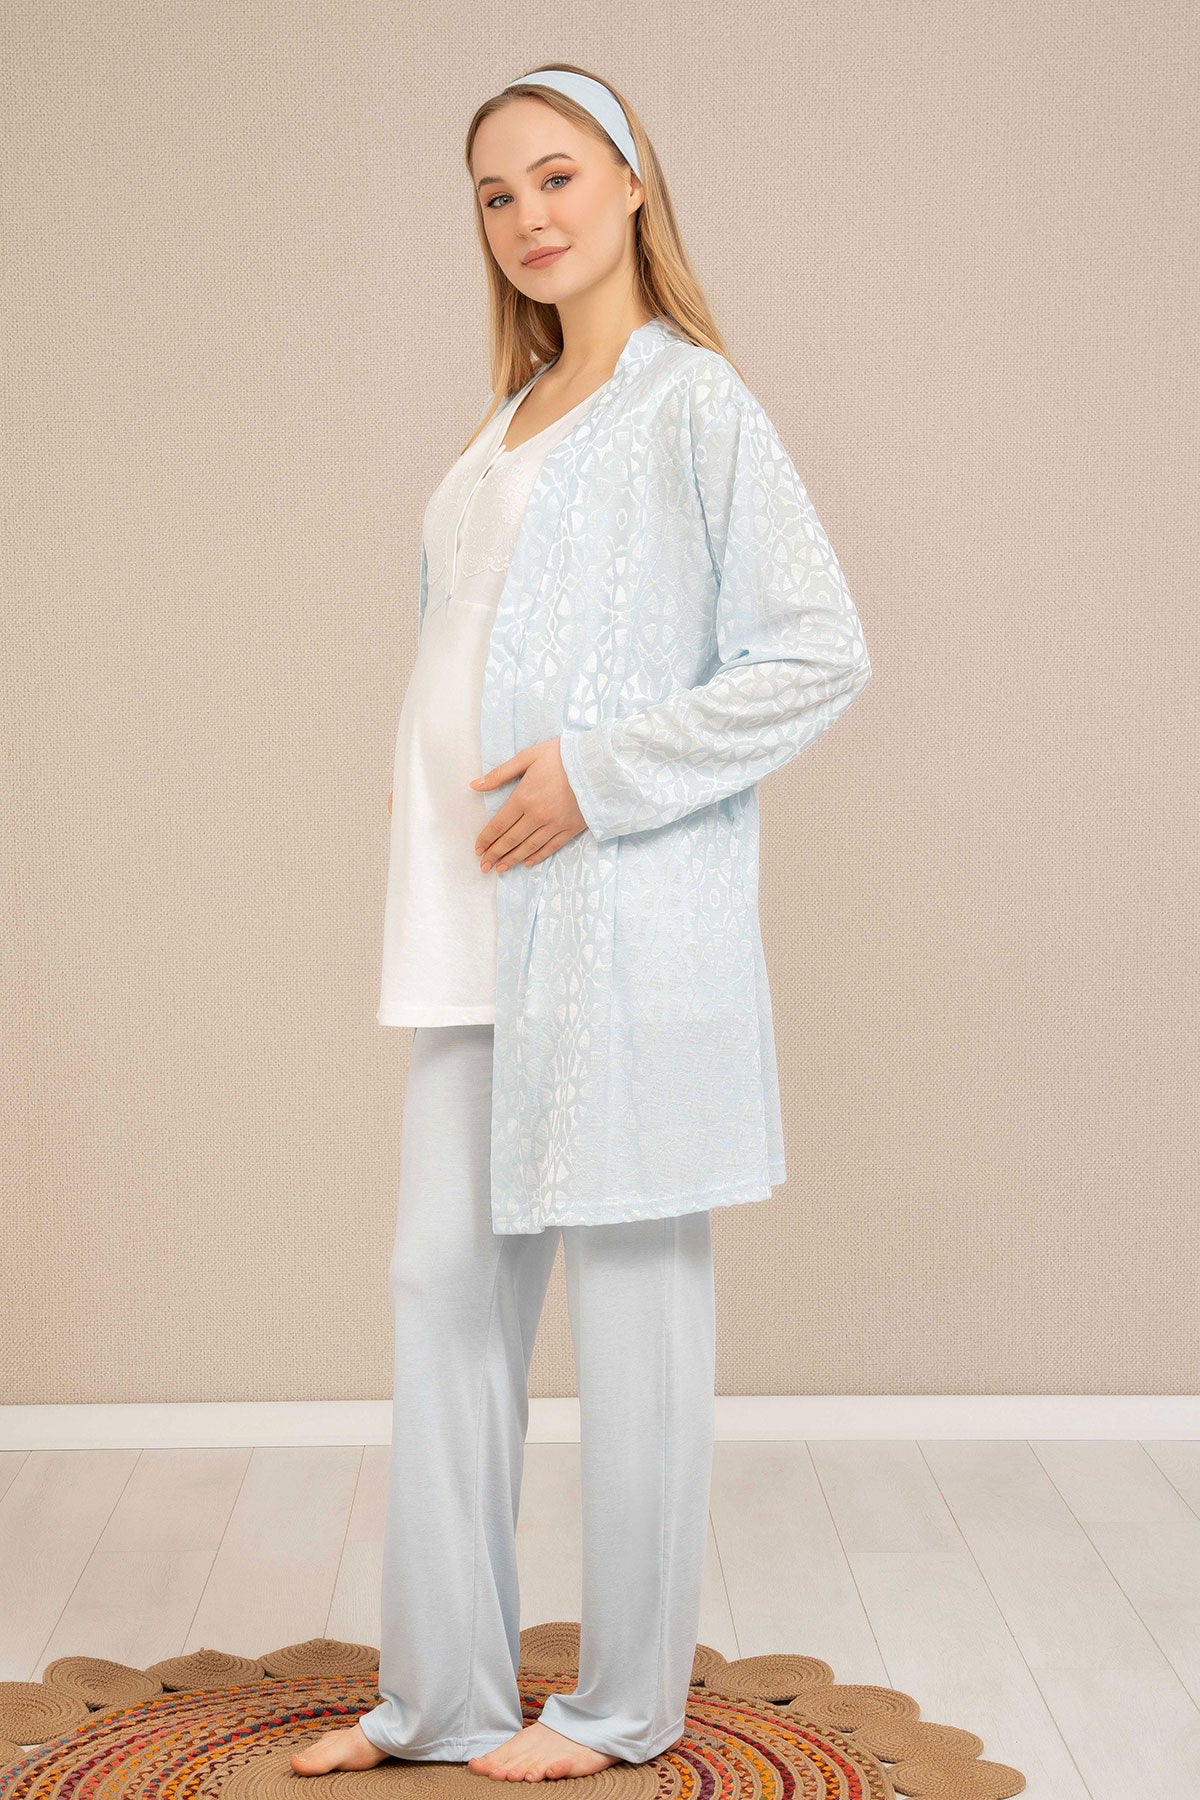 Shopymommy 4509 Lace 3-Pieces Maternity & Nursing Pajamas With Patterned Robe Blue